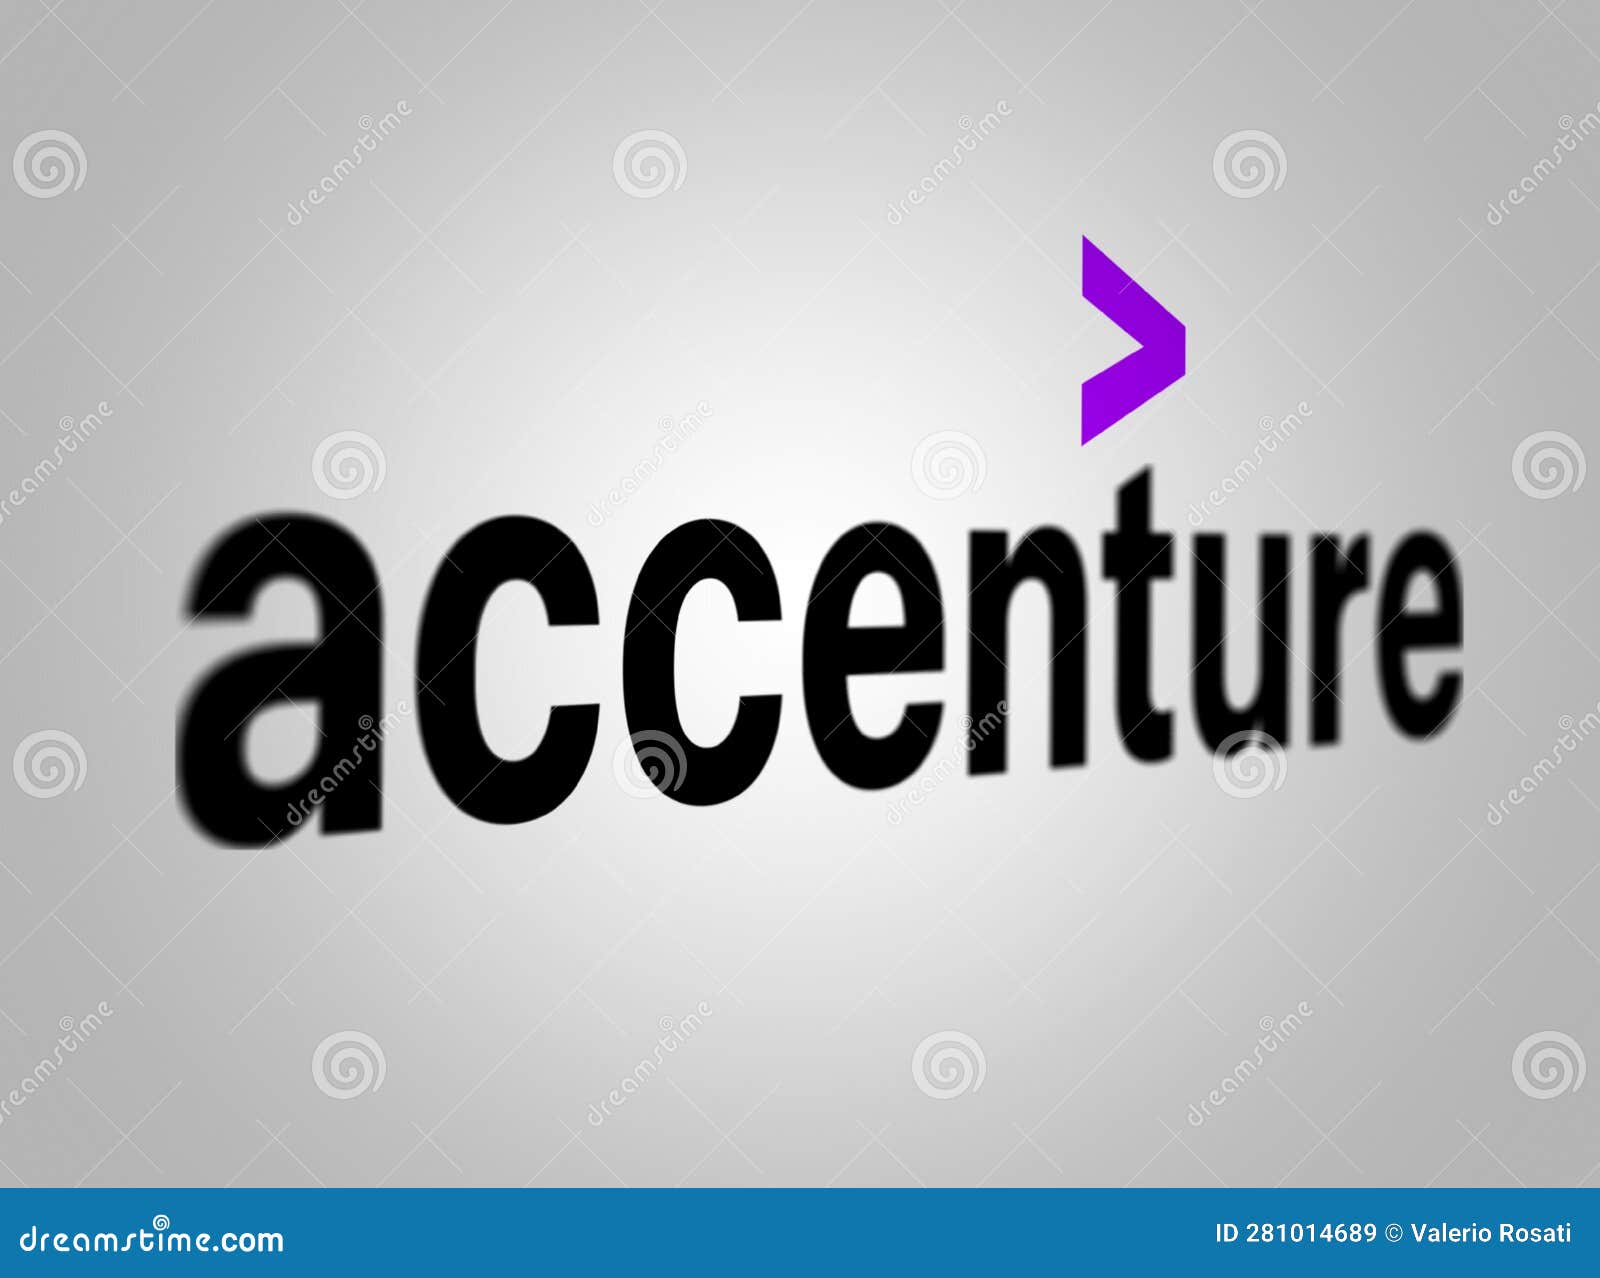 Accenture Logo on White Background Editorial Stock Image - Image of ...